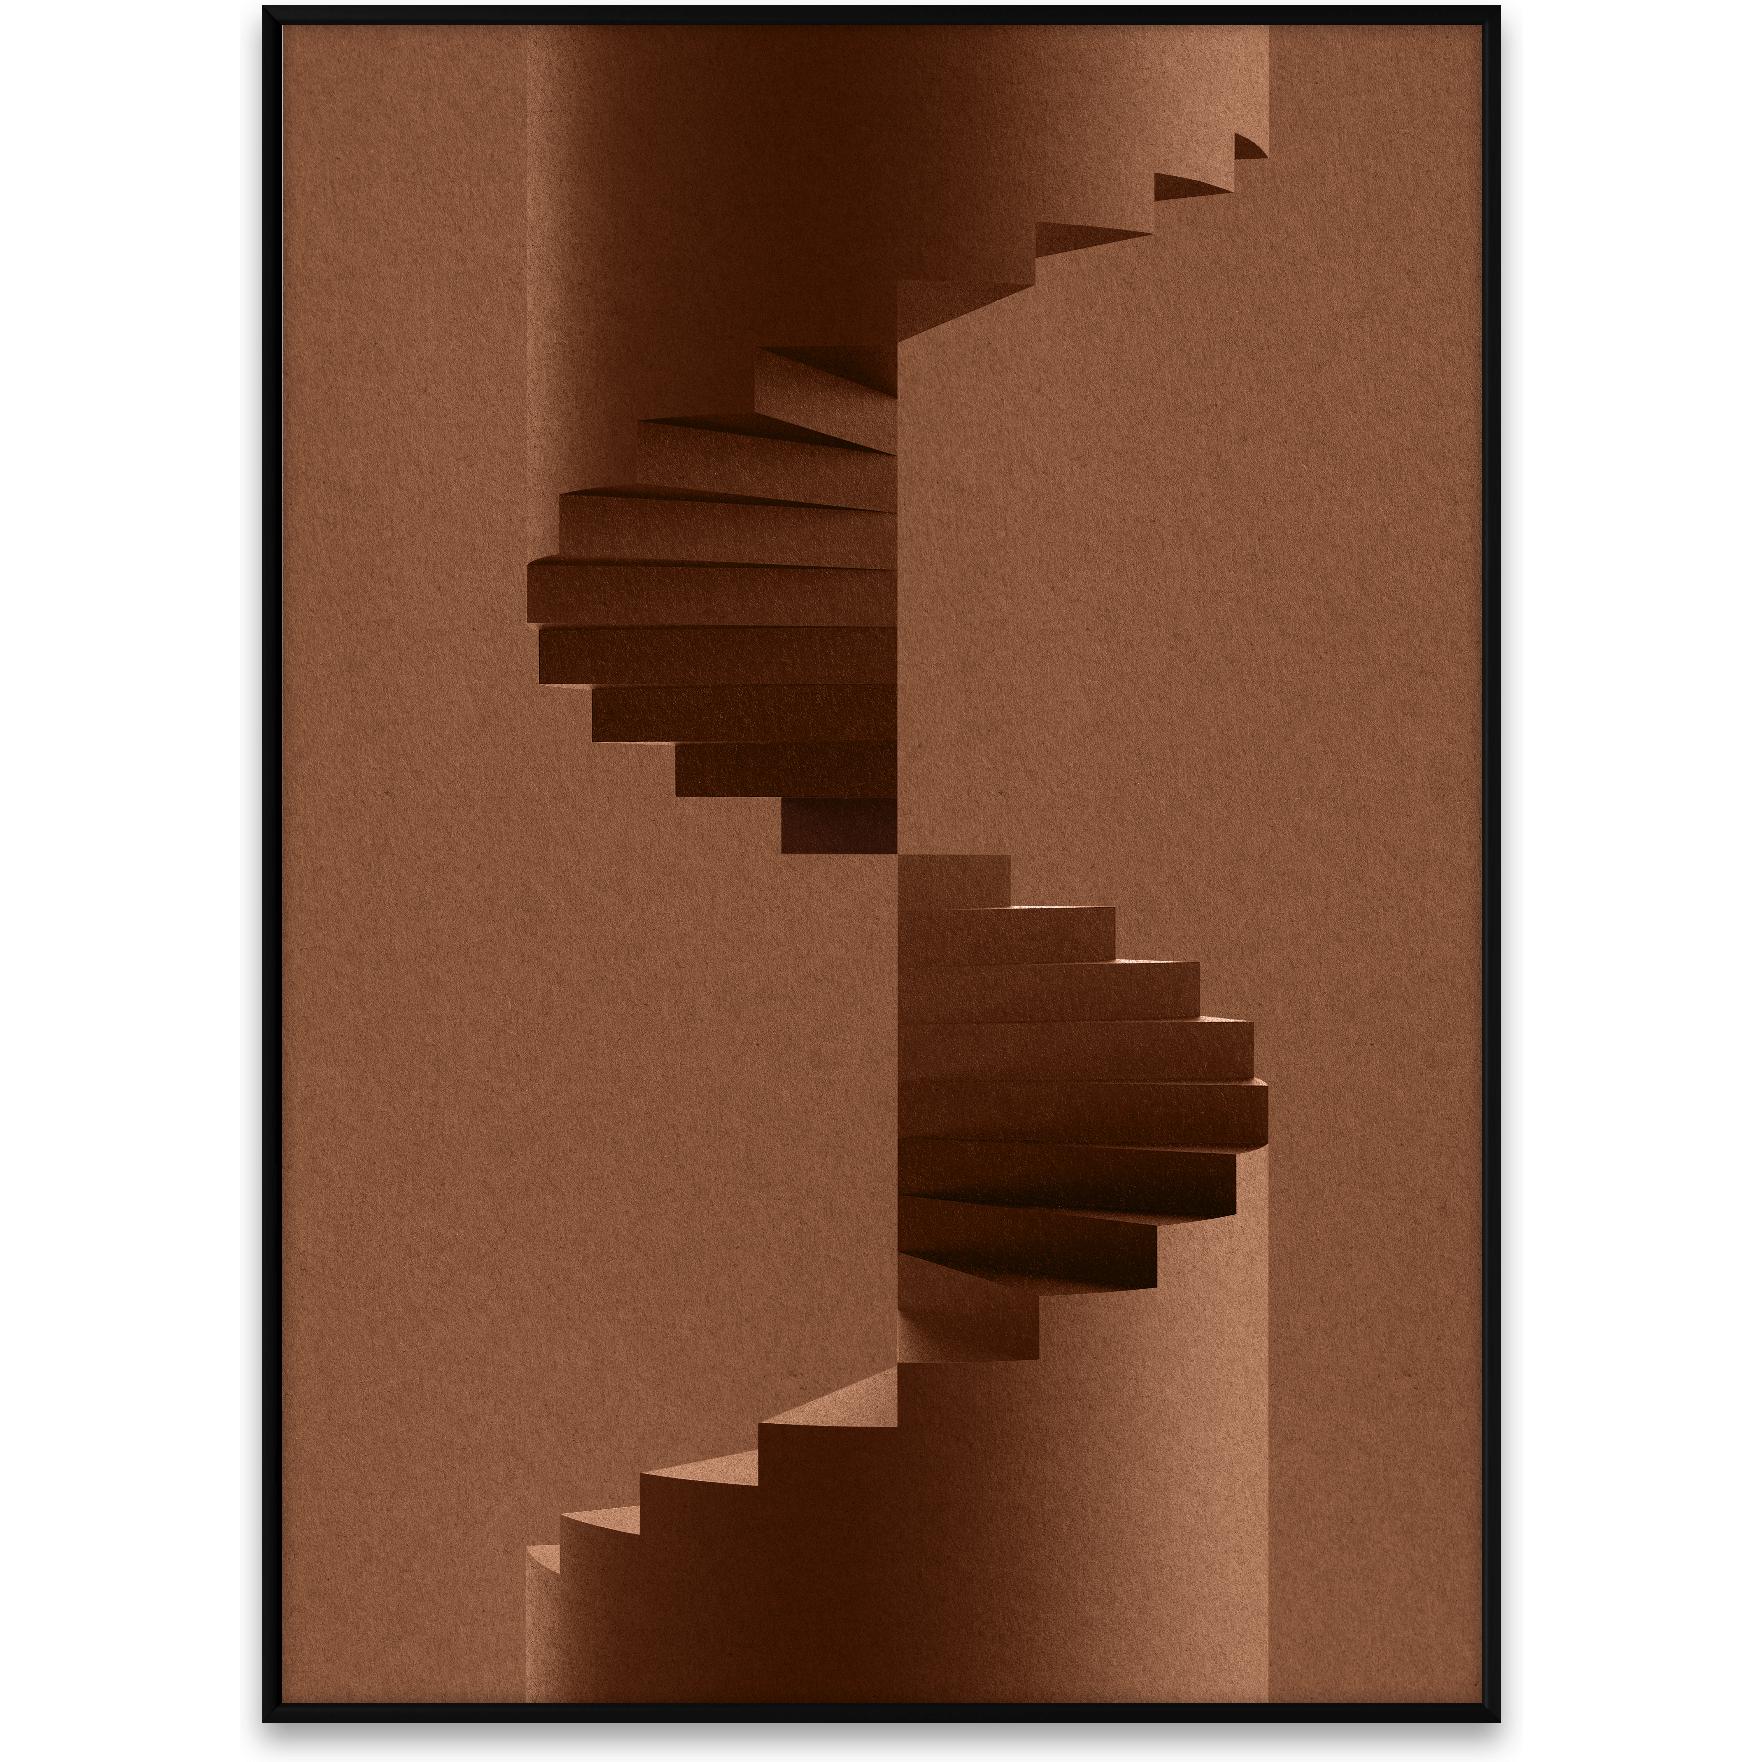 Paper Collective The Pillar Poster, 30x40 Cm